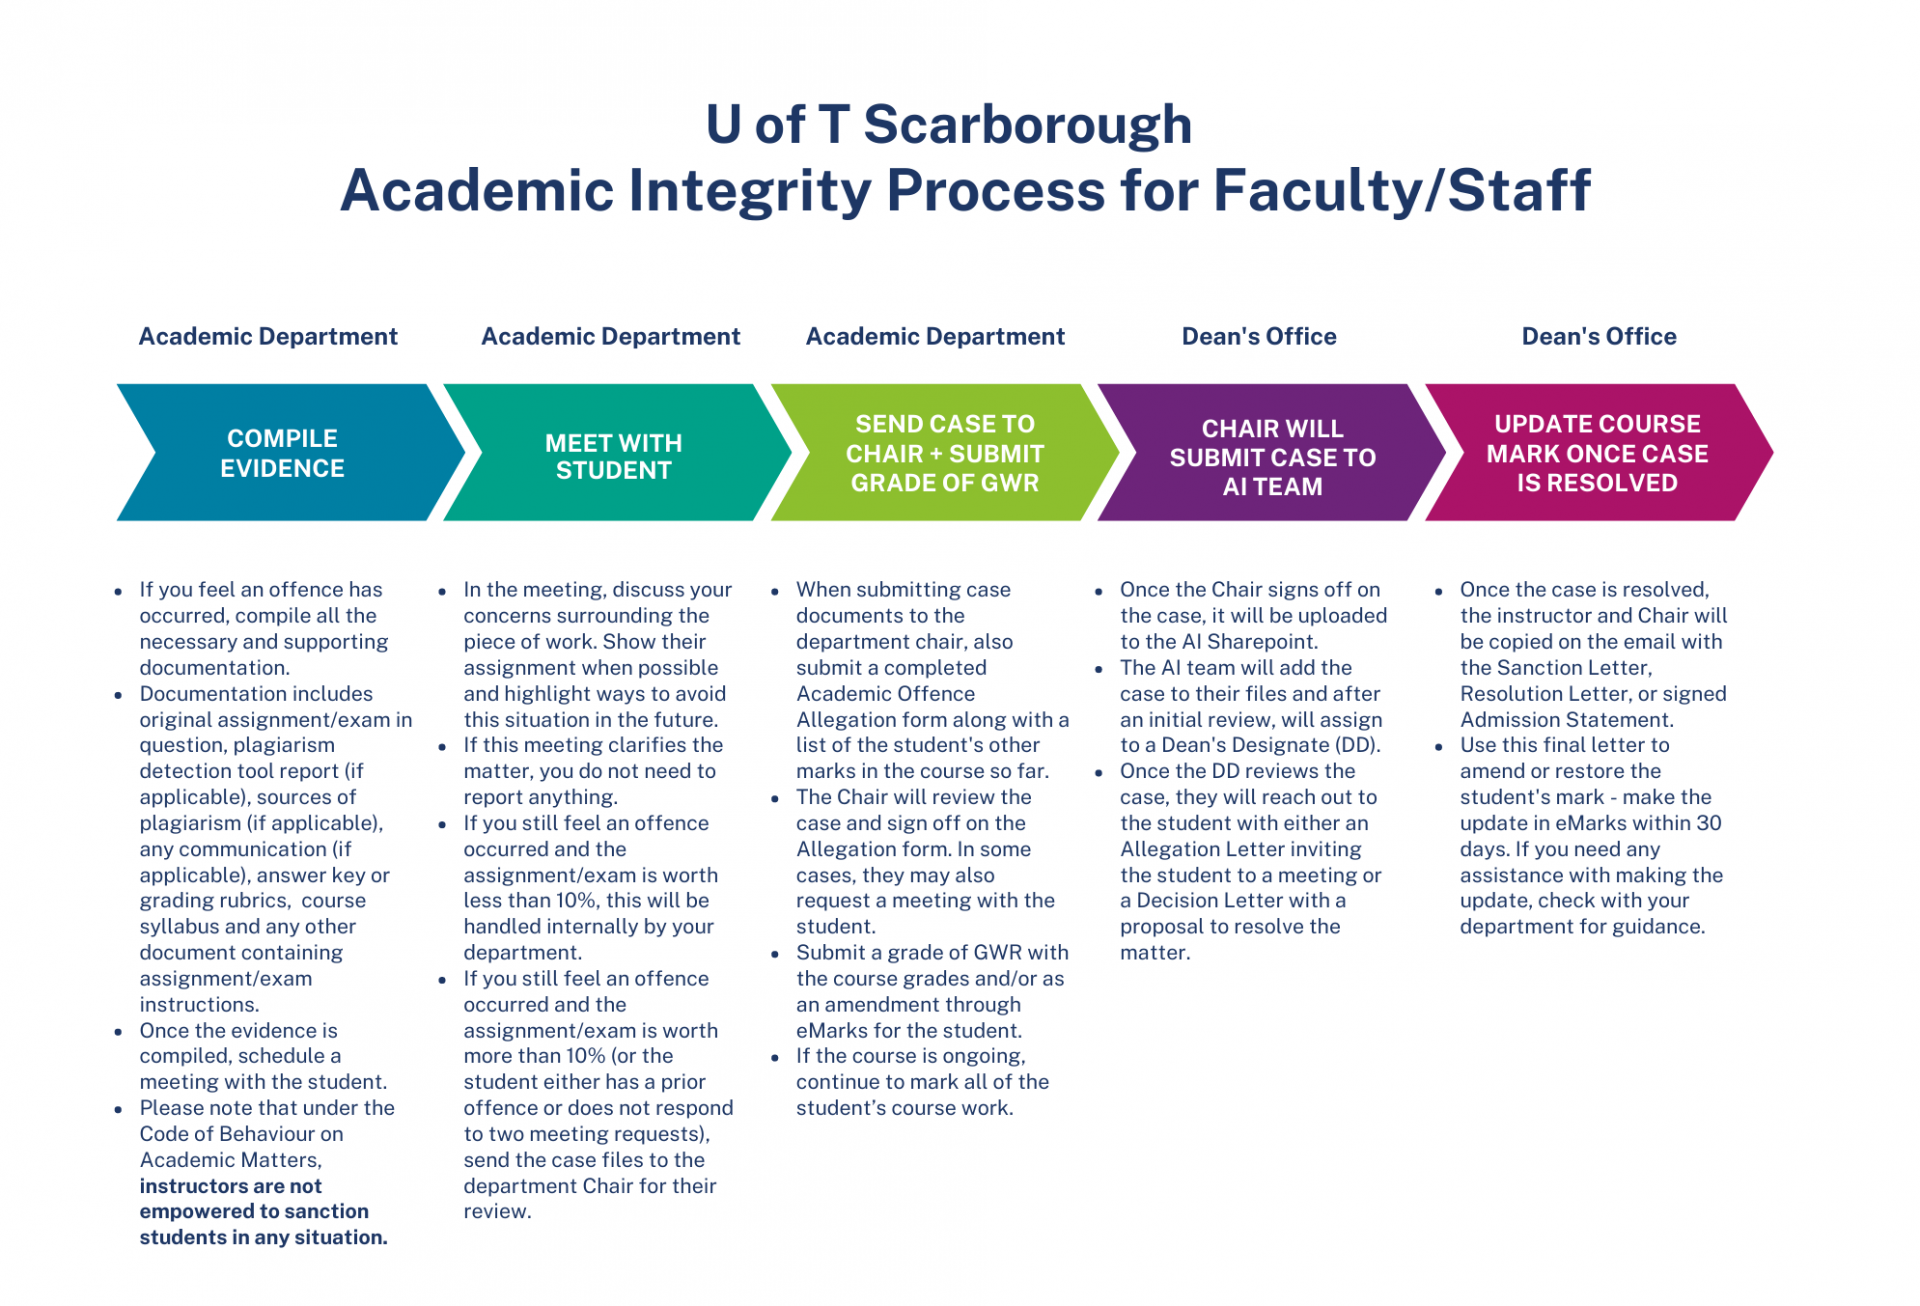 Infographic visualizing the typical lifecycle of academic integrity cases for UTSC faculty/staff